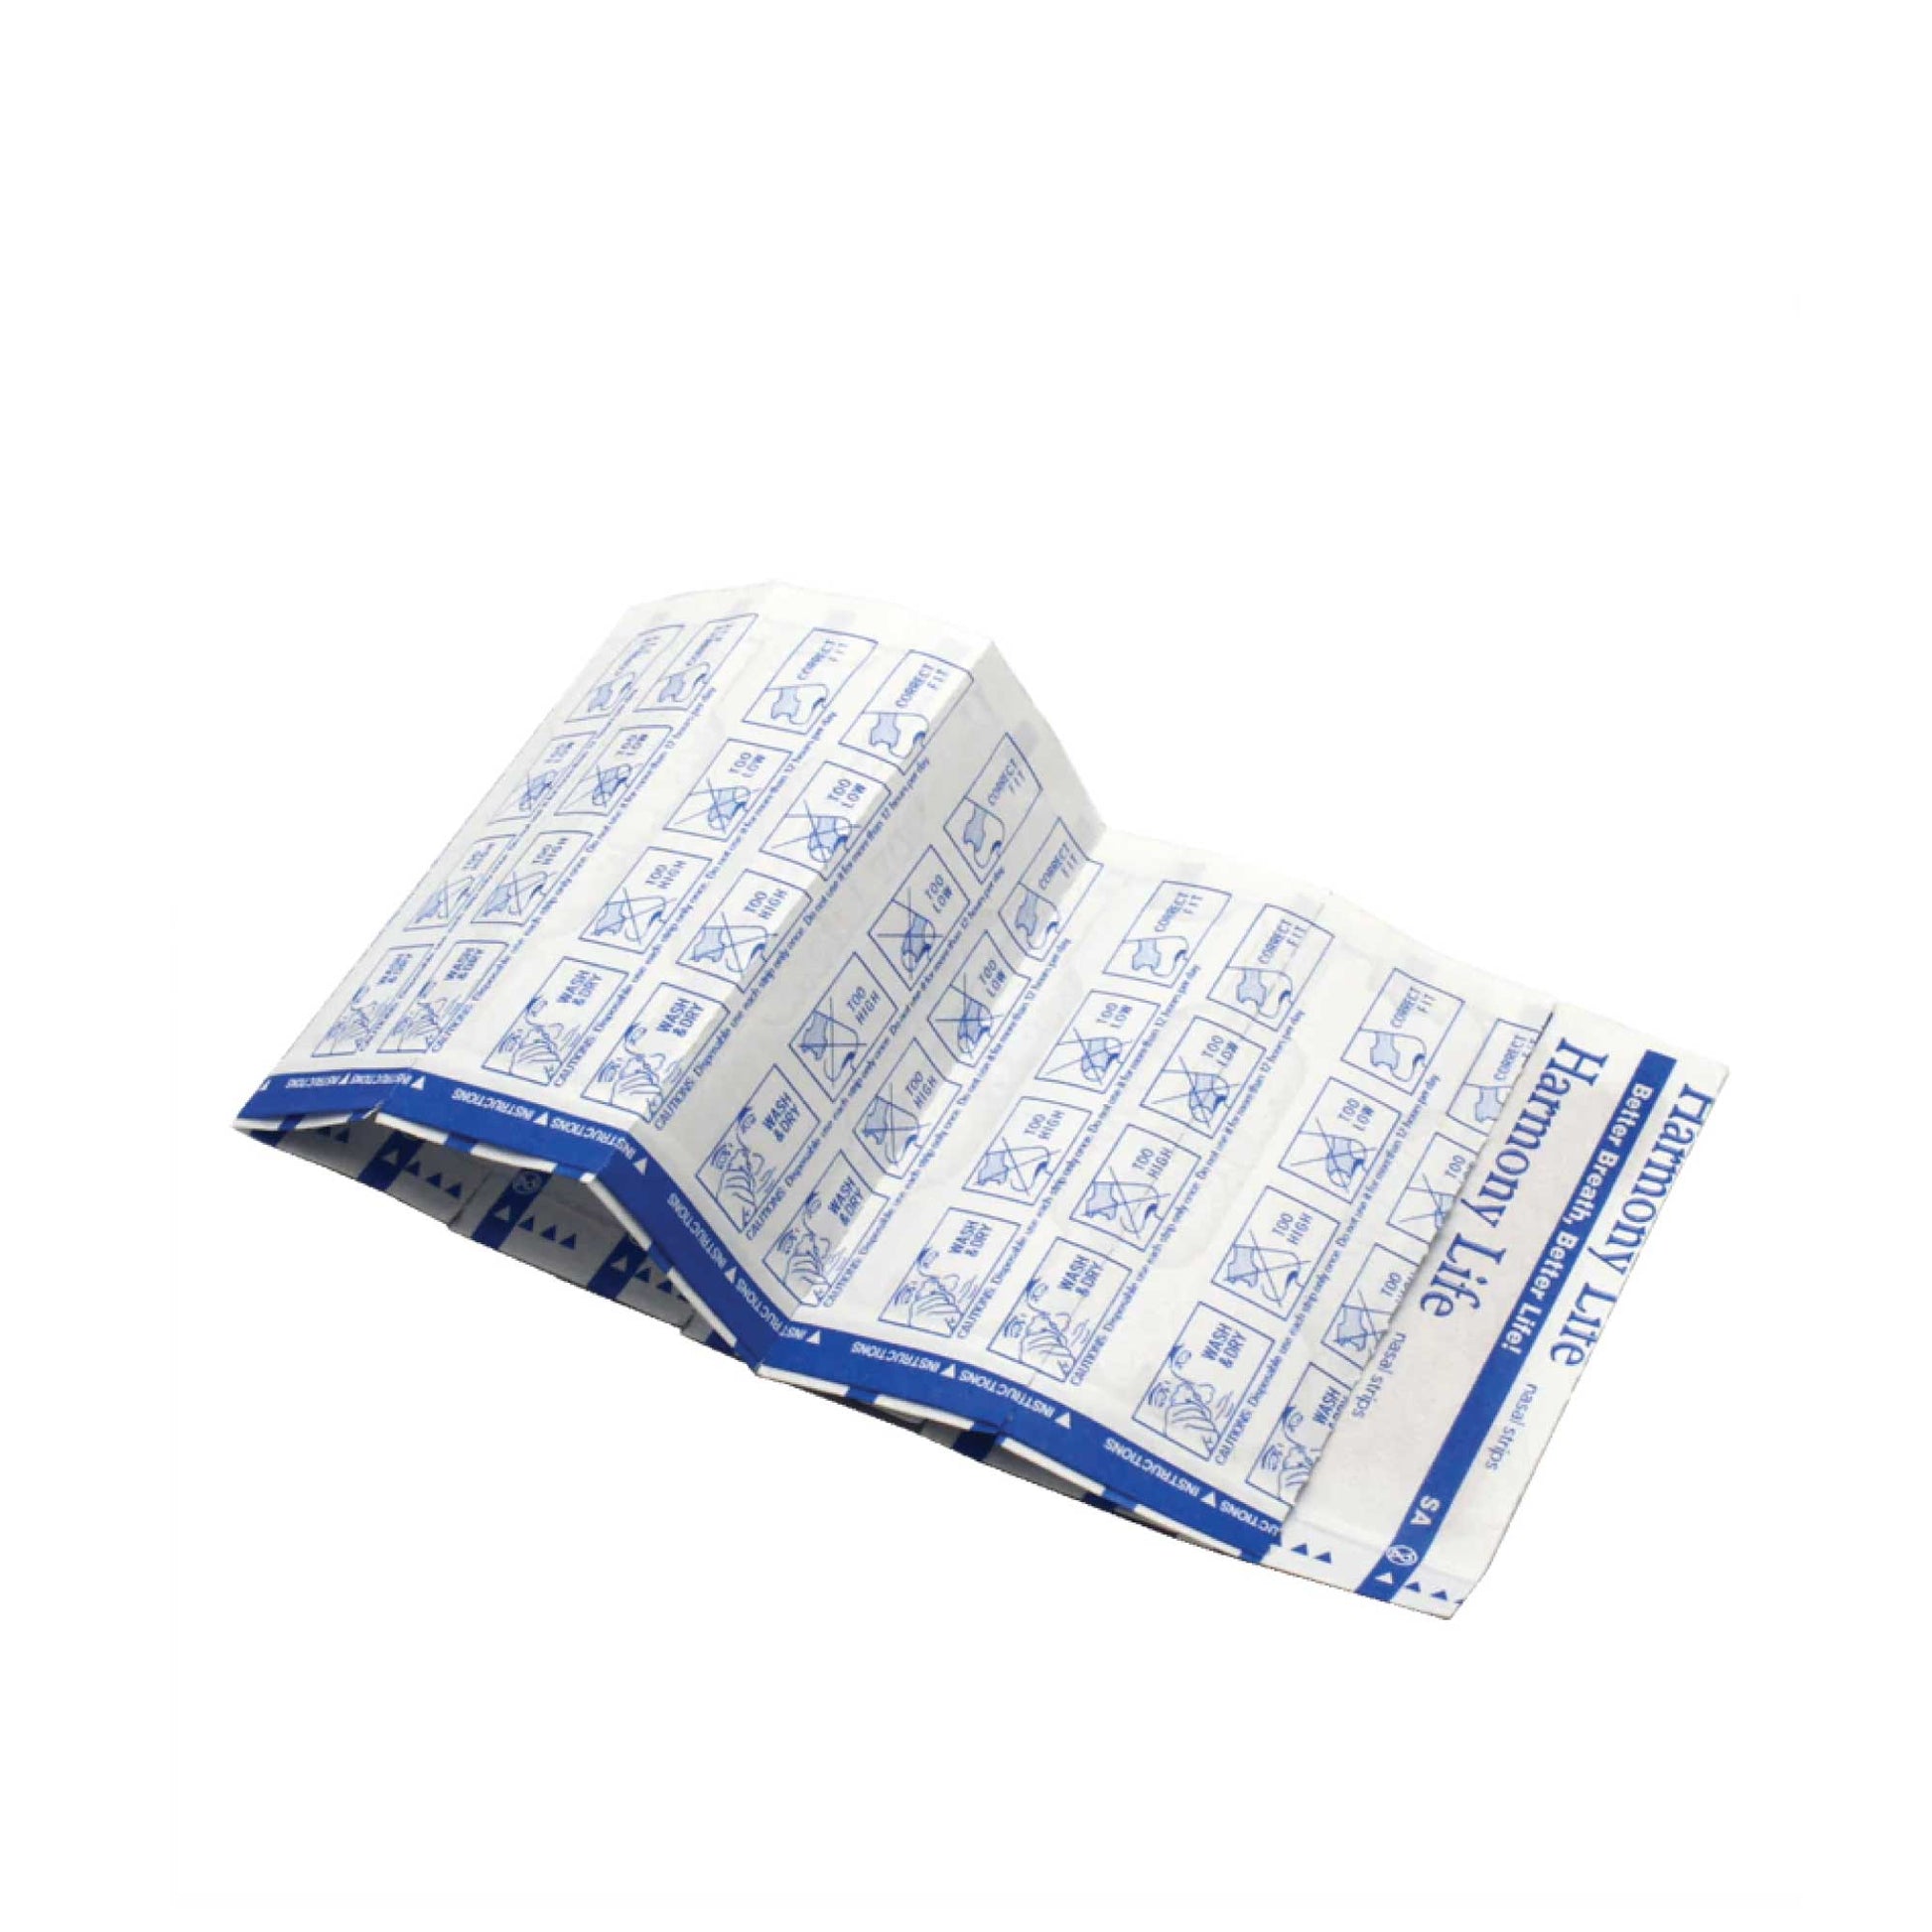 150x Anti Snore Aid Snoring Nasal Strips - Nose Sleeping and Breathing Device